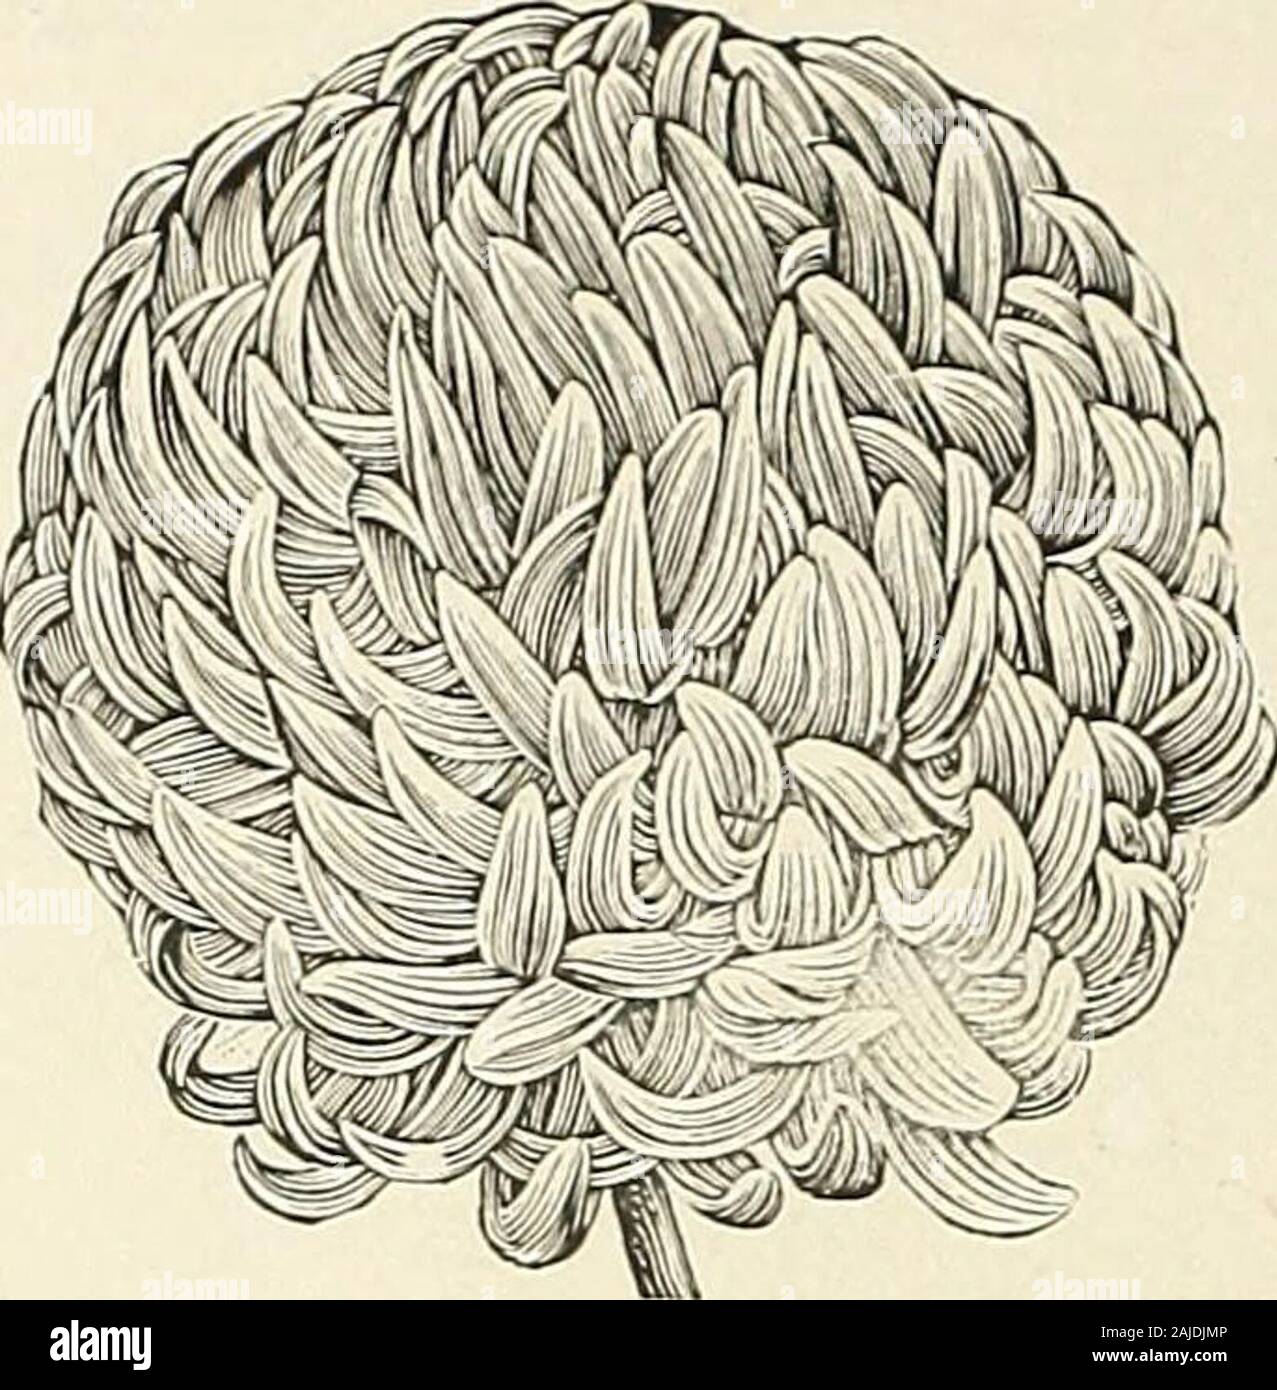 H.W Buckbee seed and plant guide : 1905 . h 25c;my price 15c. Marshall Field—The best of all variegated Carnations. Whit ewith broad scarlet stripes. The flowers are borne in great pro-fusion, the plant making a vigorous growth. It has a stiff,wiry stem. Worth 2 5c; my price 15c each. Golden Beauty—Bright golden yellow with pink markings, ahigh-built handsome flowe r of large size, the most productiveyellow Carnation. Worth 25c; my price 15c each. Her Majesty—One of the most free blooming varieties everoffered ; color clear snowy white : flowers are very striking andfragrant; stem long and sti Stock Photo